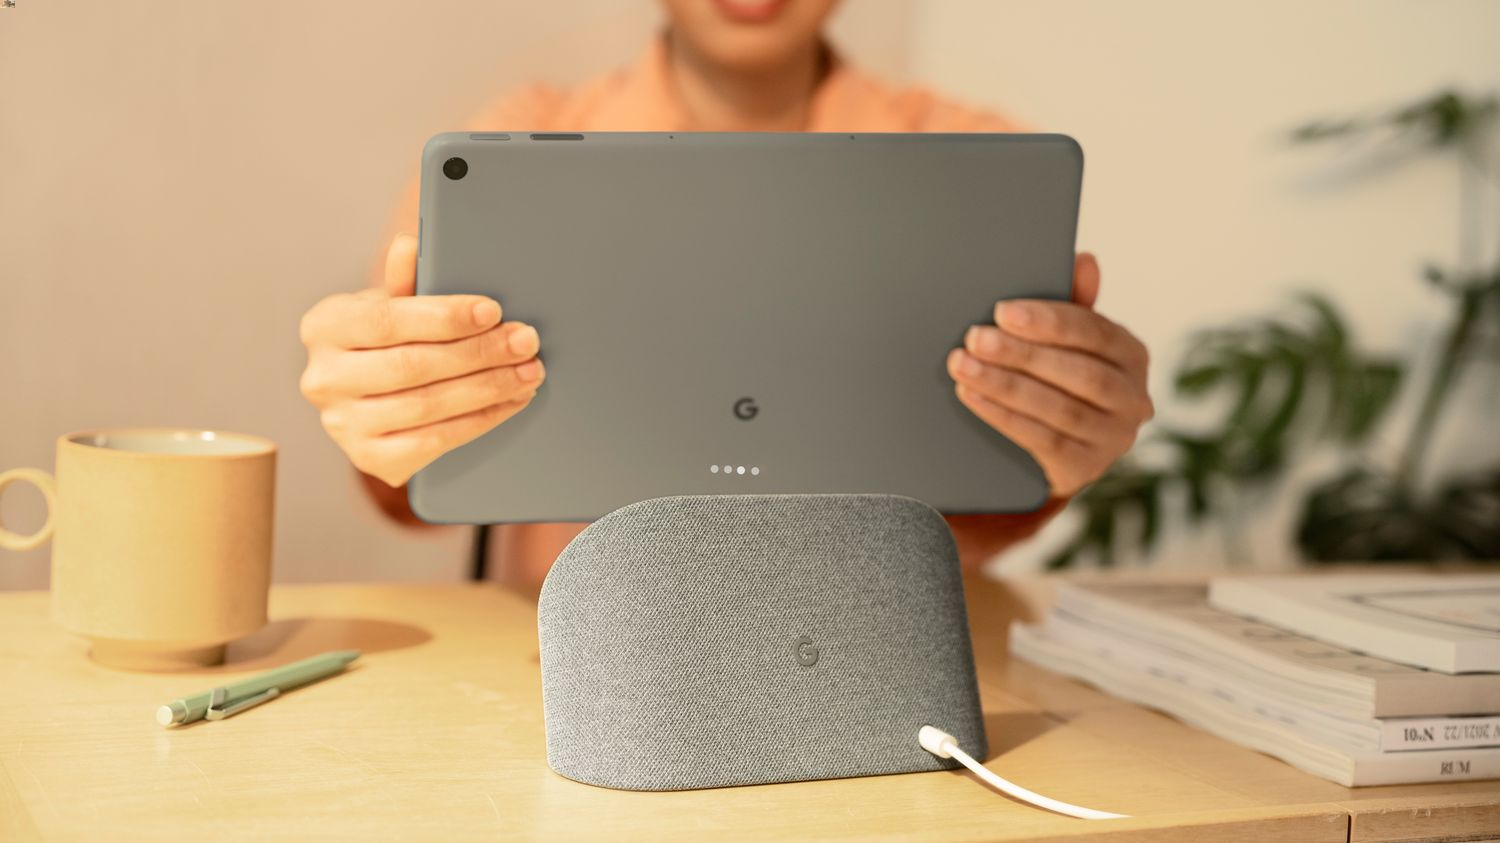 googles-special-dock-turns-the-pixel-tablet-into-a-nest-hub